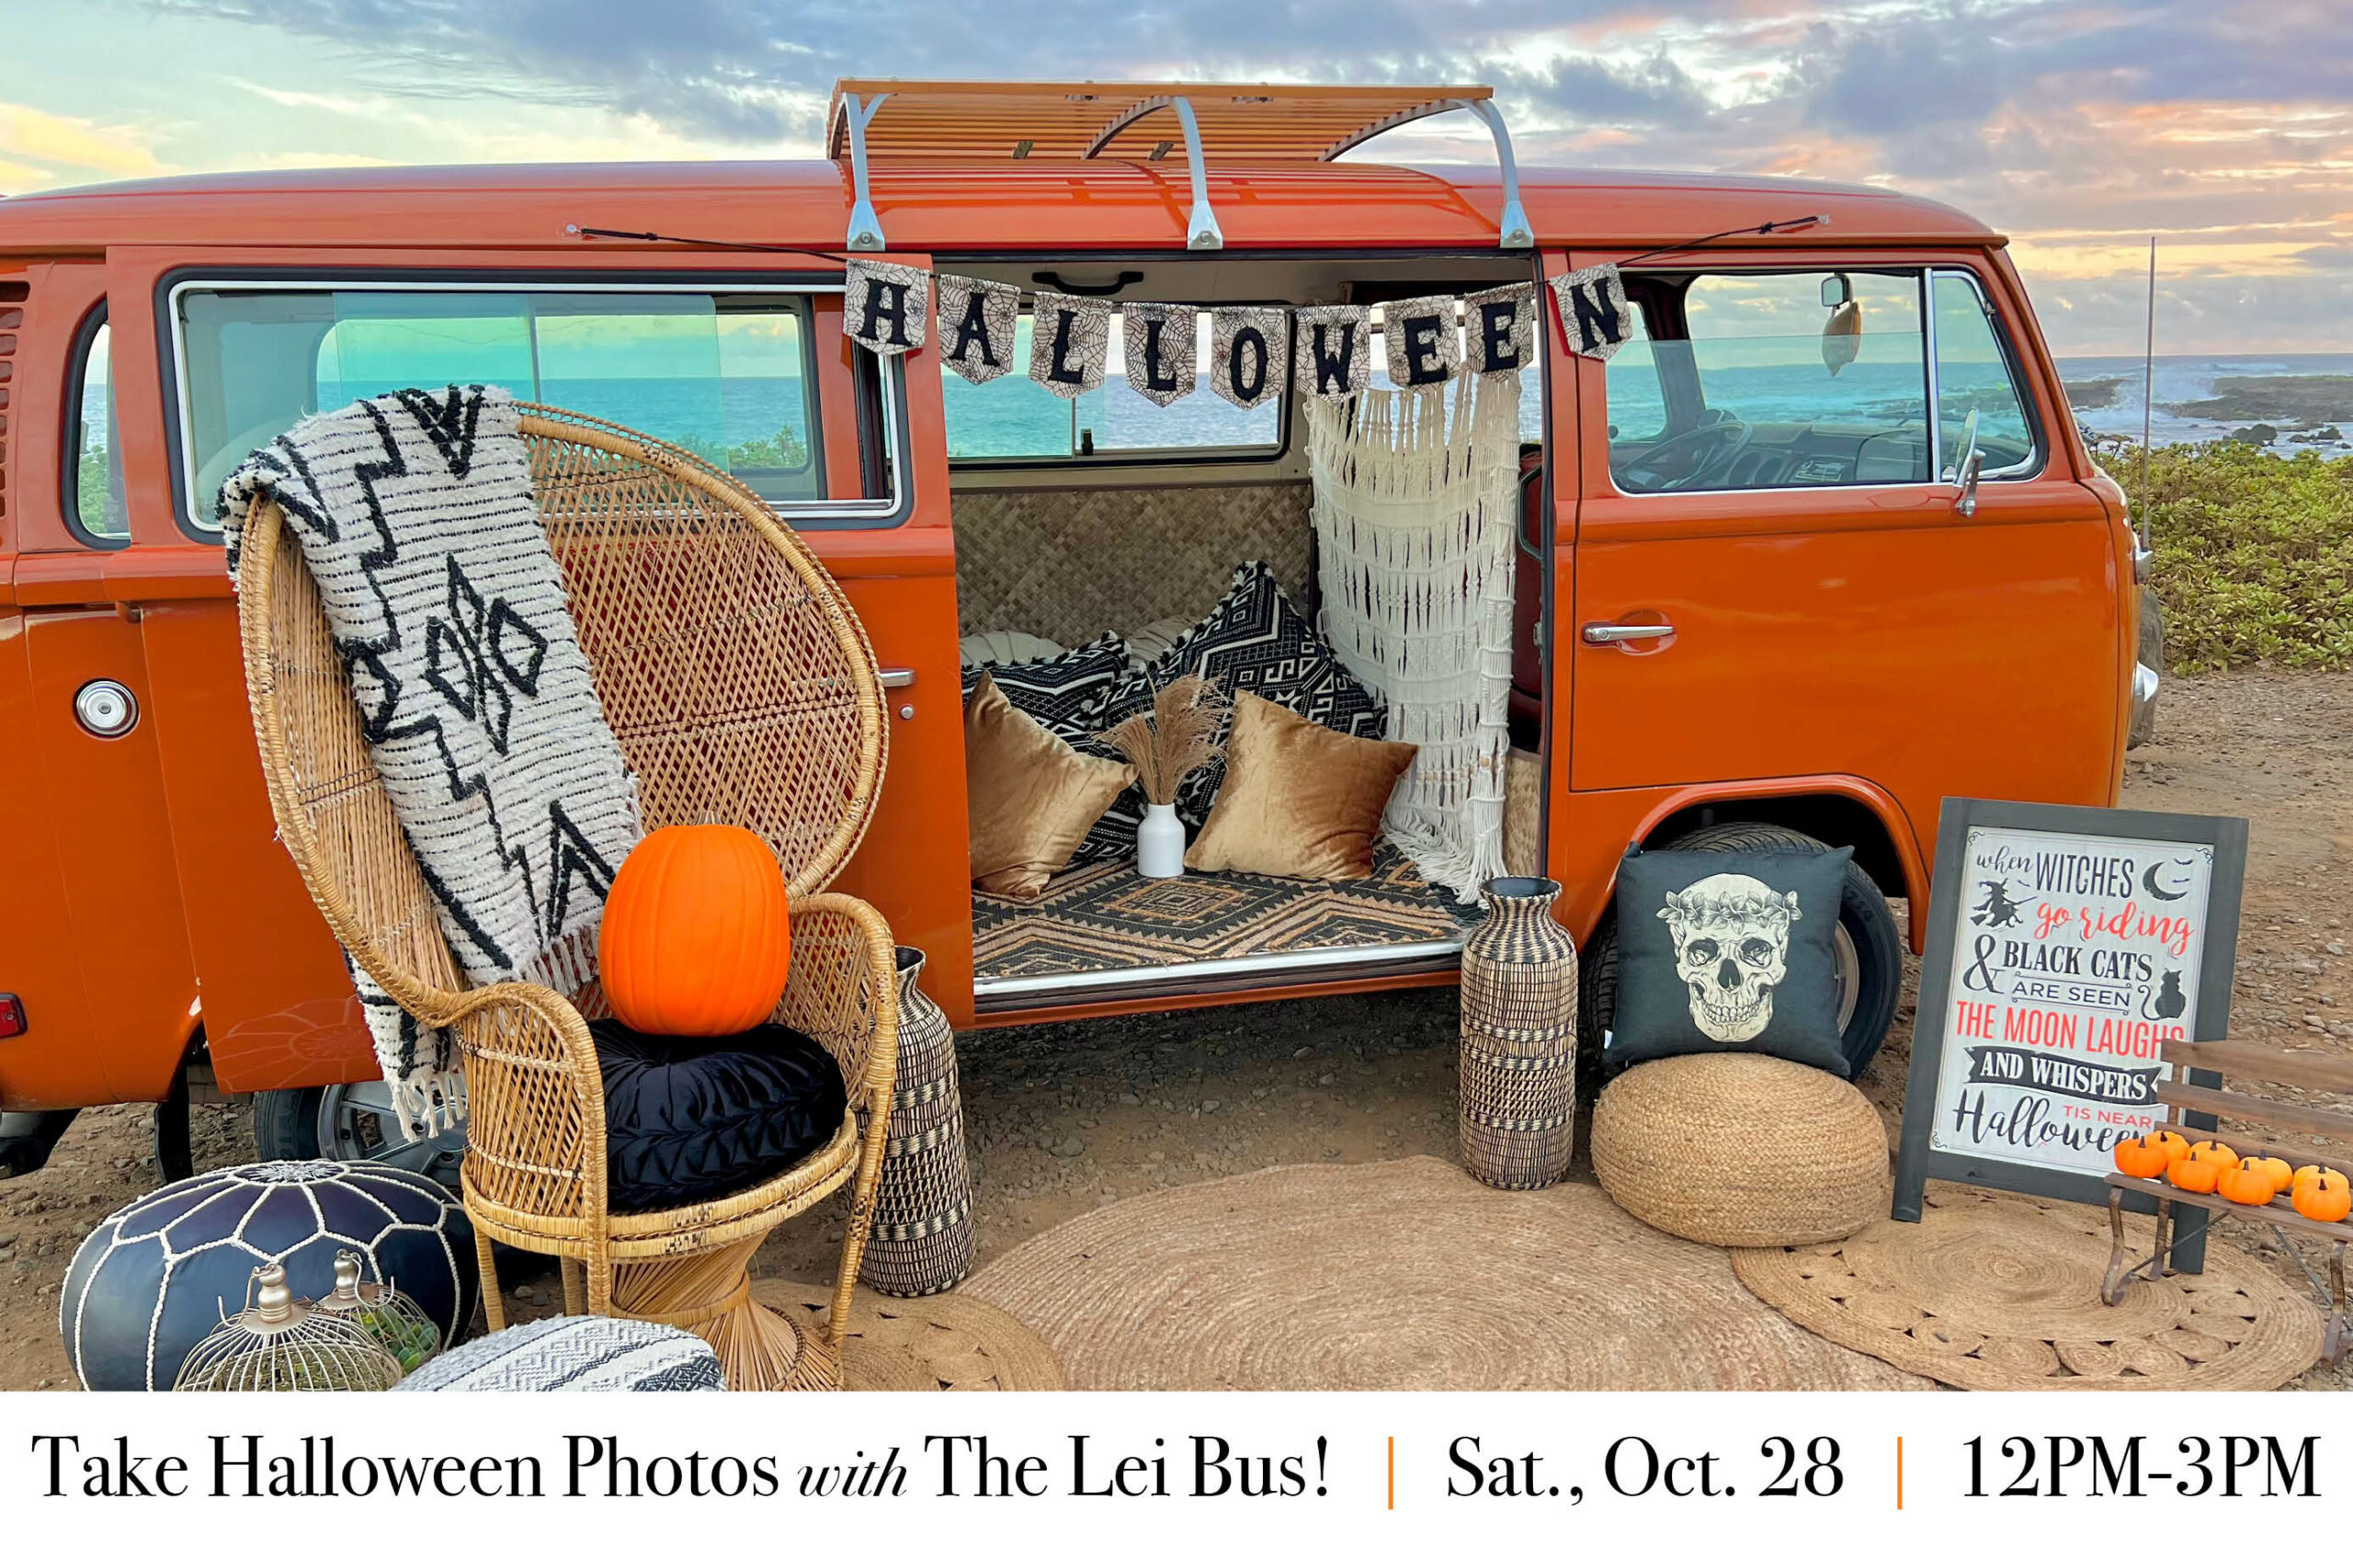 A Spooktacular Halloween Photo Op with "The Lei Bus!"